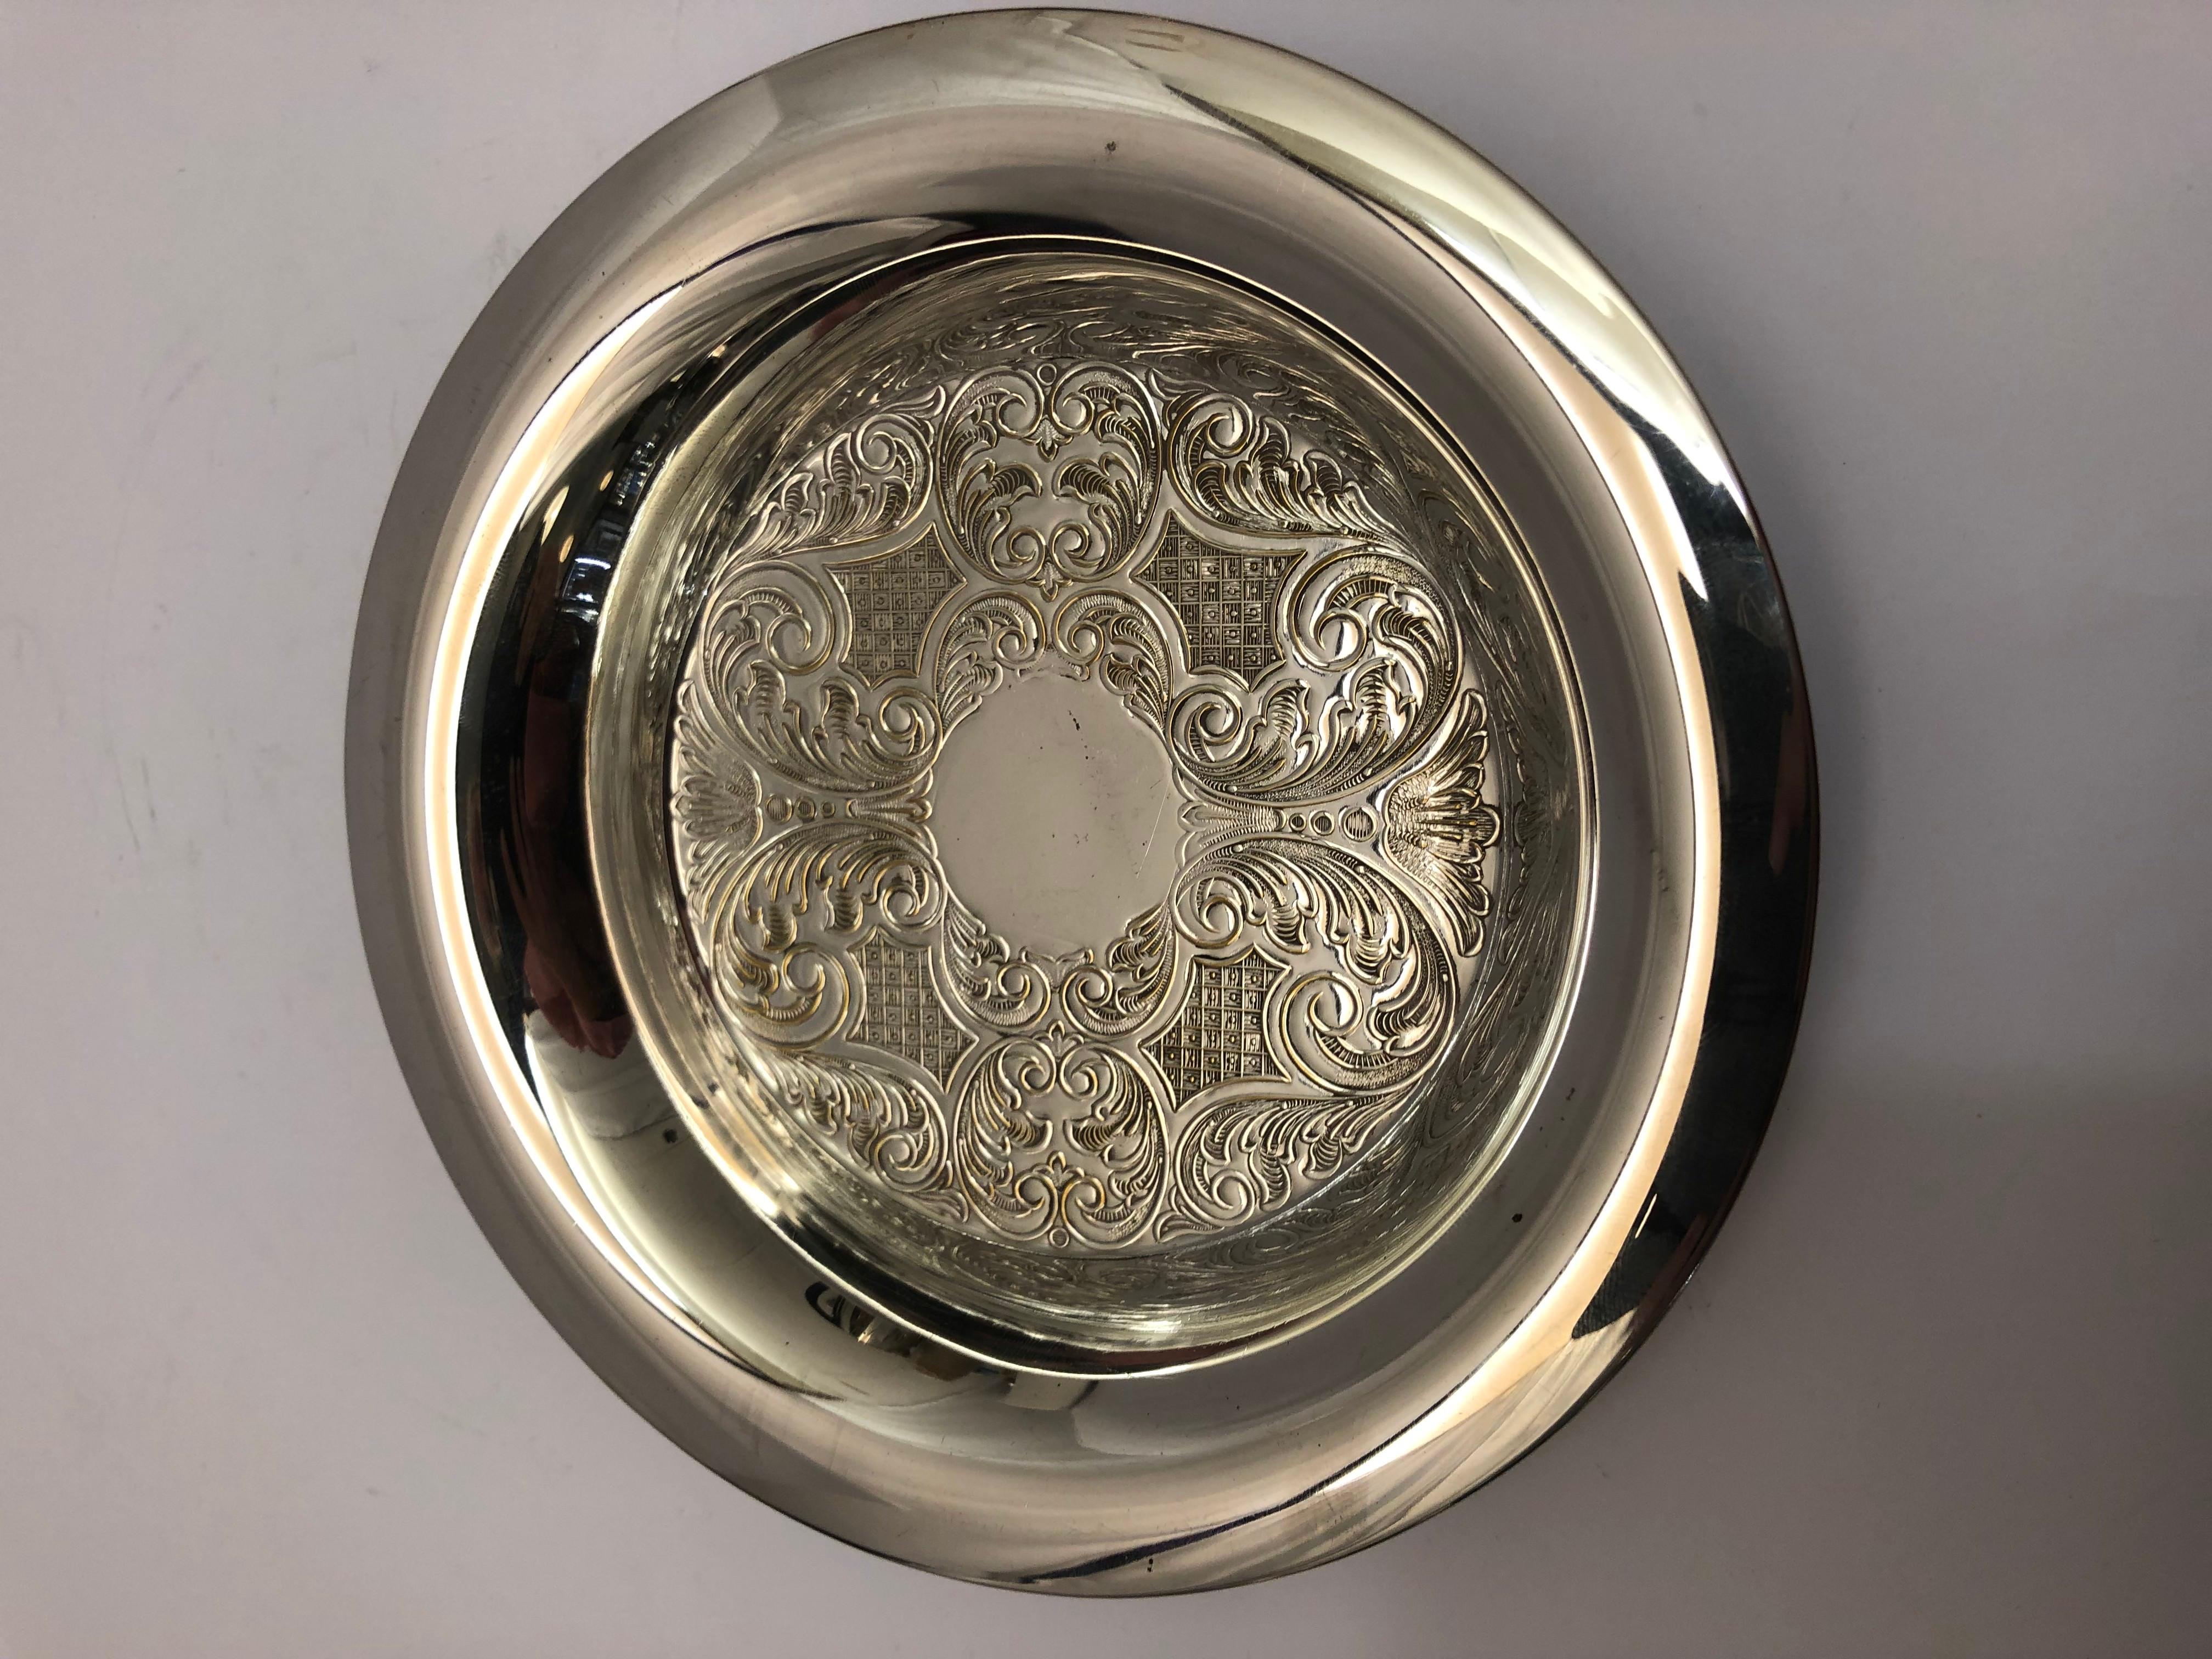 Silver plate circular dish with embossed decoration & a broad rim, English, circa 1920.